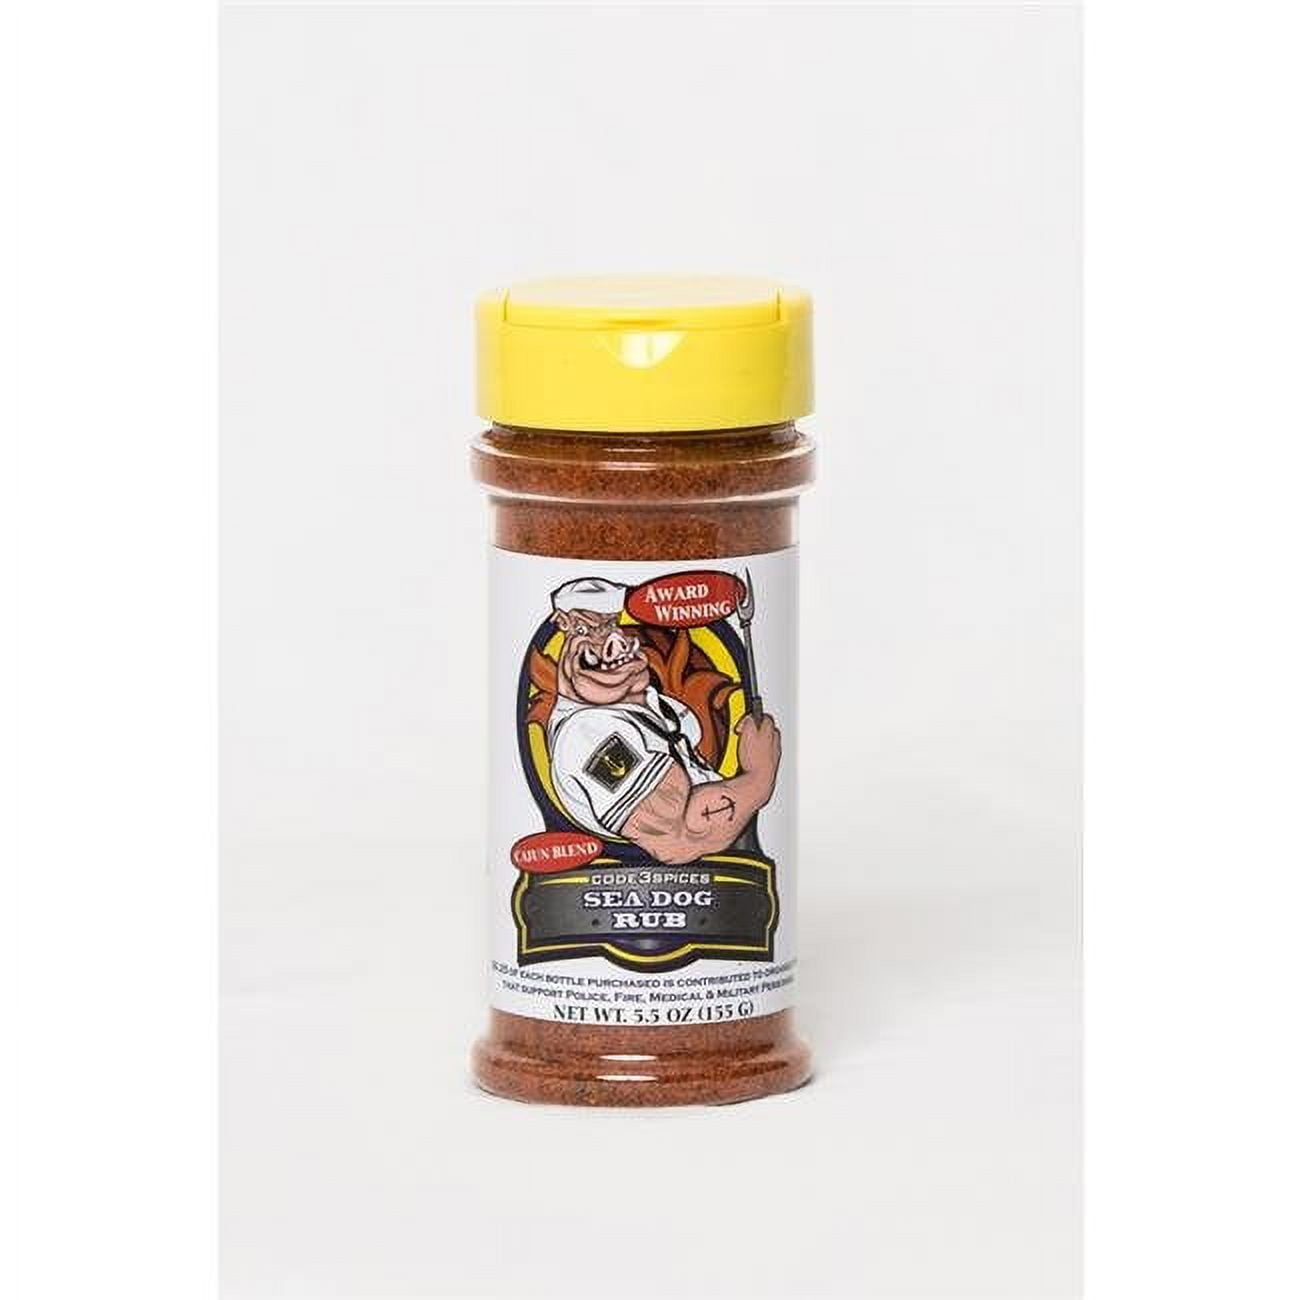 Picture of Code 3 Spices 8003570 5.5 oz Cajun Blend BBQ Seasoning